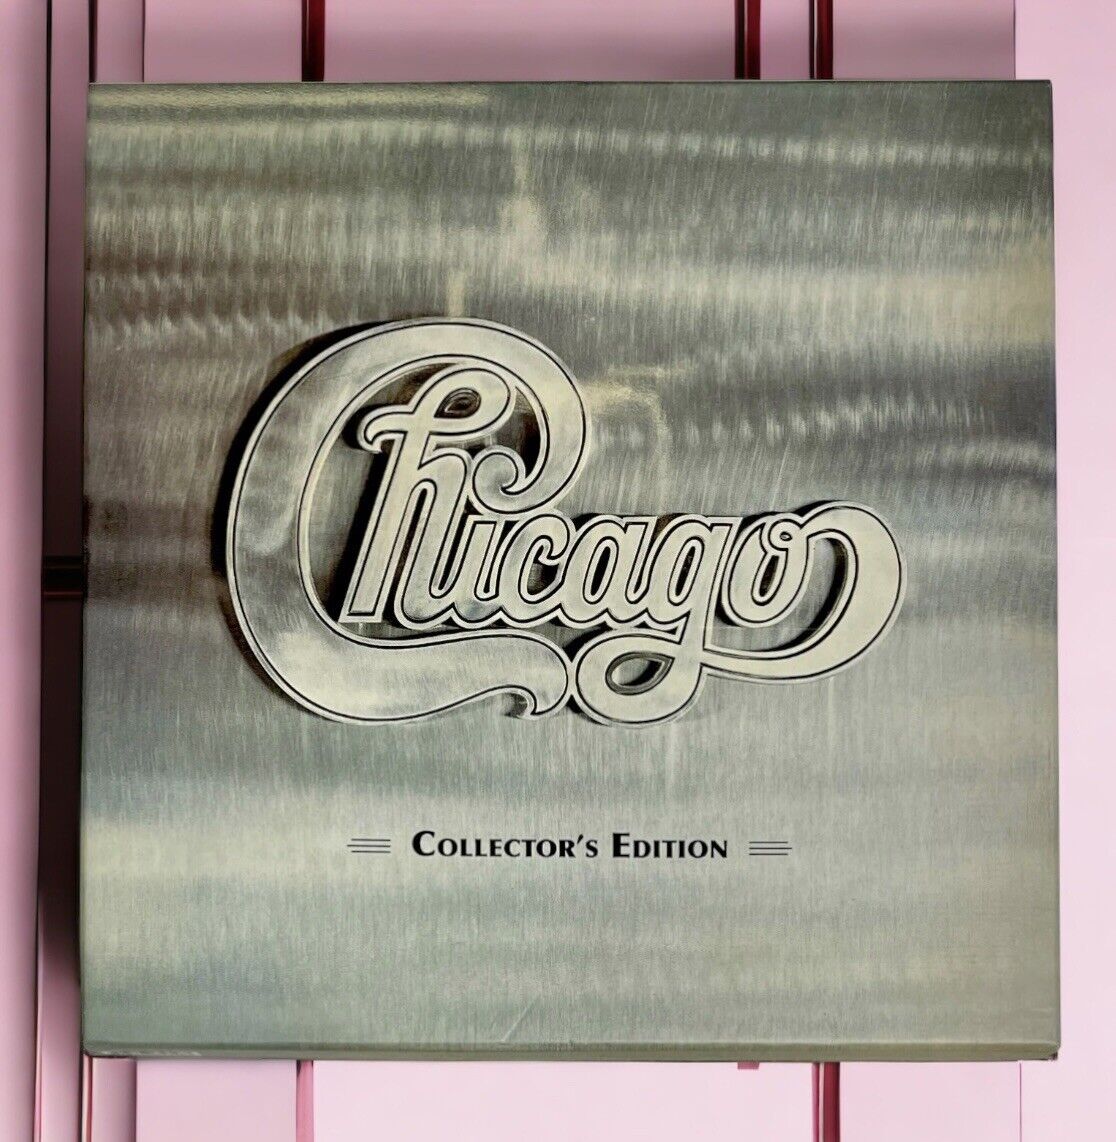 Chicago - Chicago II Collector's Edition (2CD/2LP/1DVD) With DVD Never Used